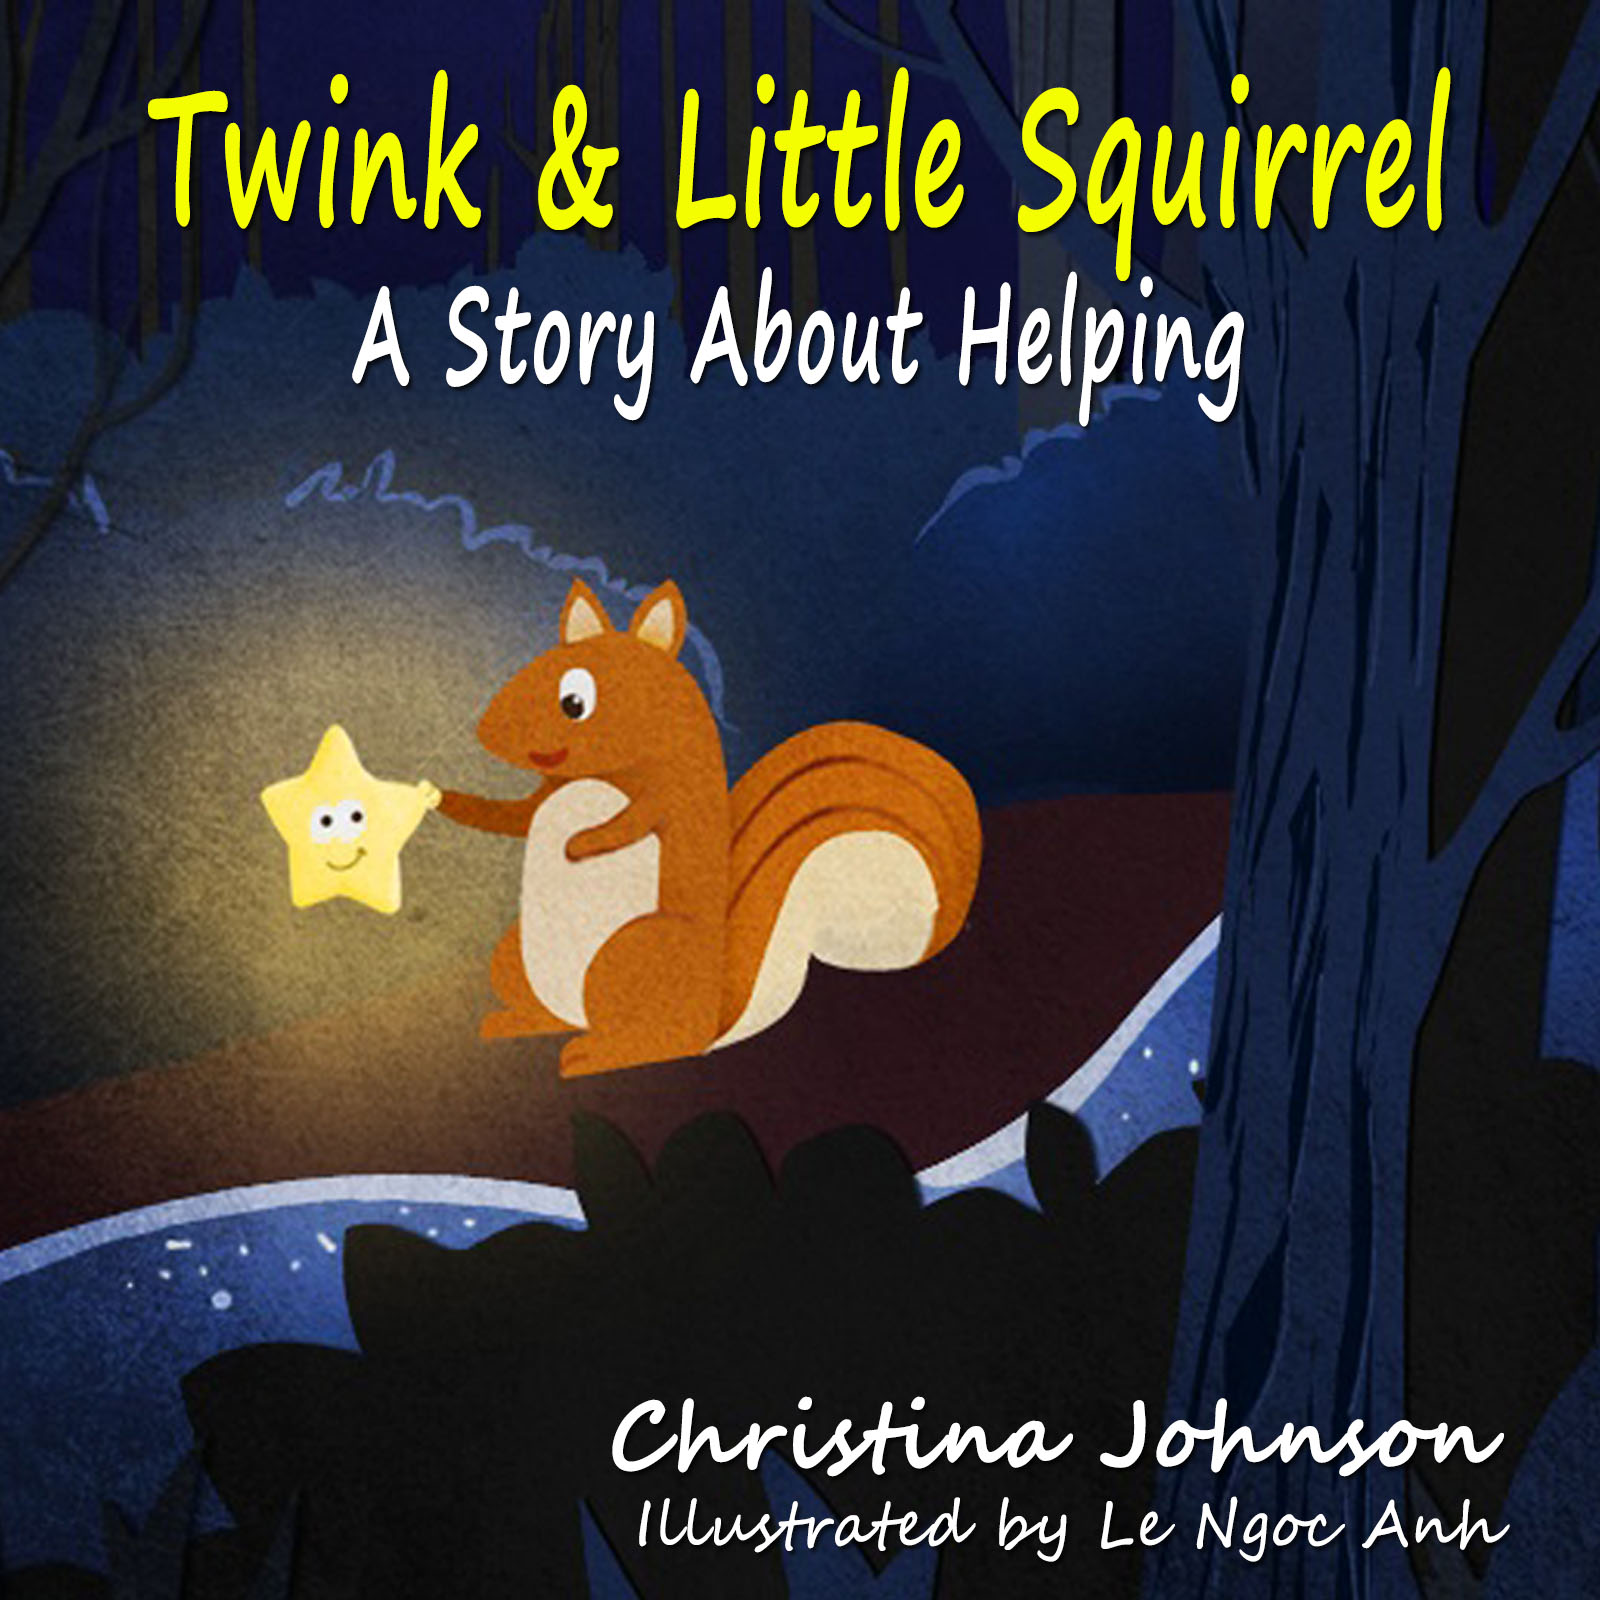 FREE: Twink & Little Squirrel (A Story About Helping) by Christina Johnson